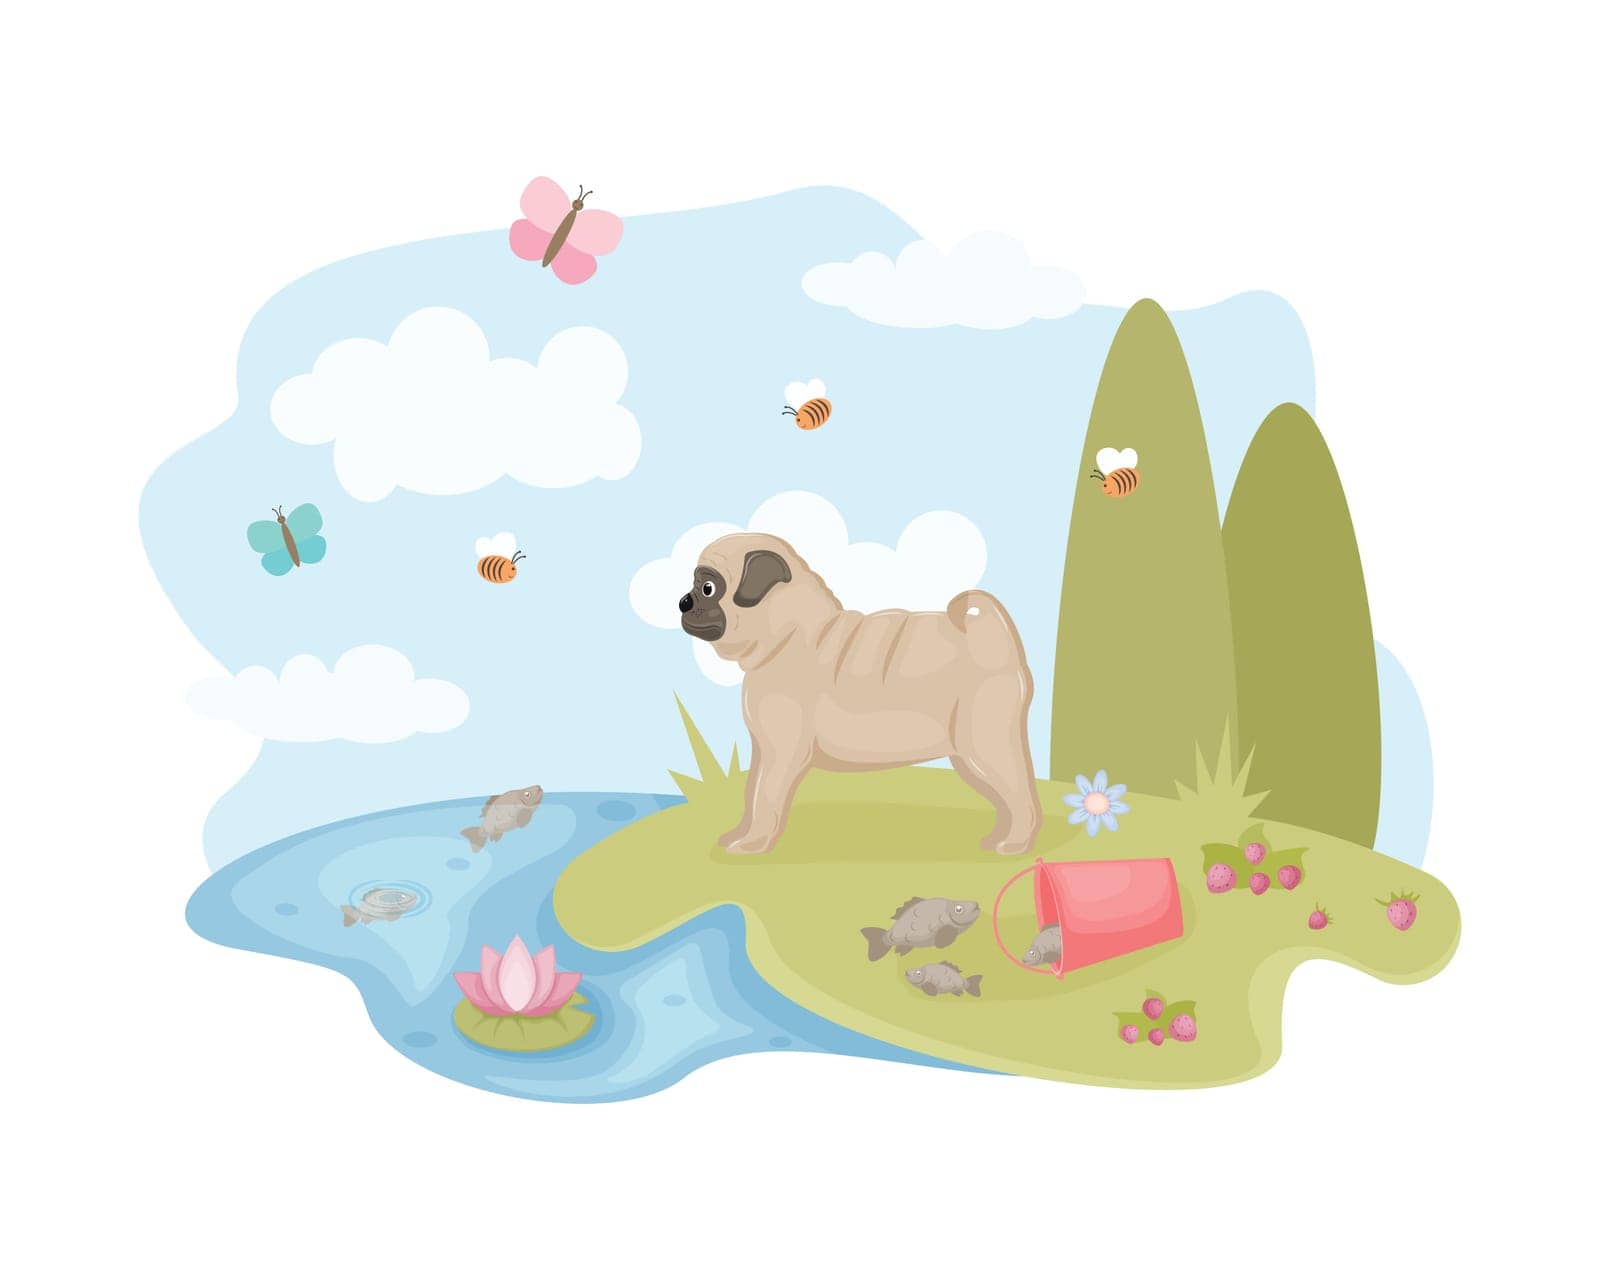 Pug. Cute cartoon-style pug stands near the lake, butterflies and bees fly around it. Pug in nature. Vector illustration.